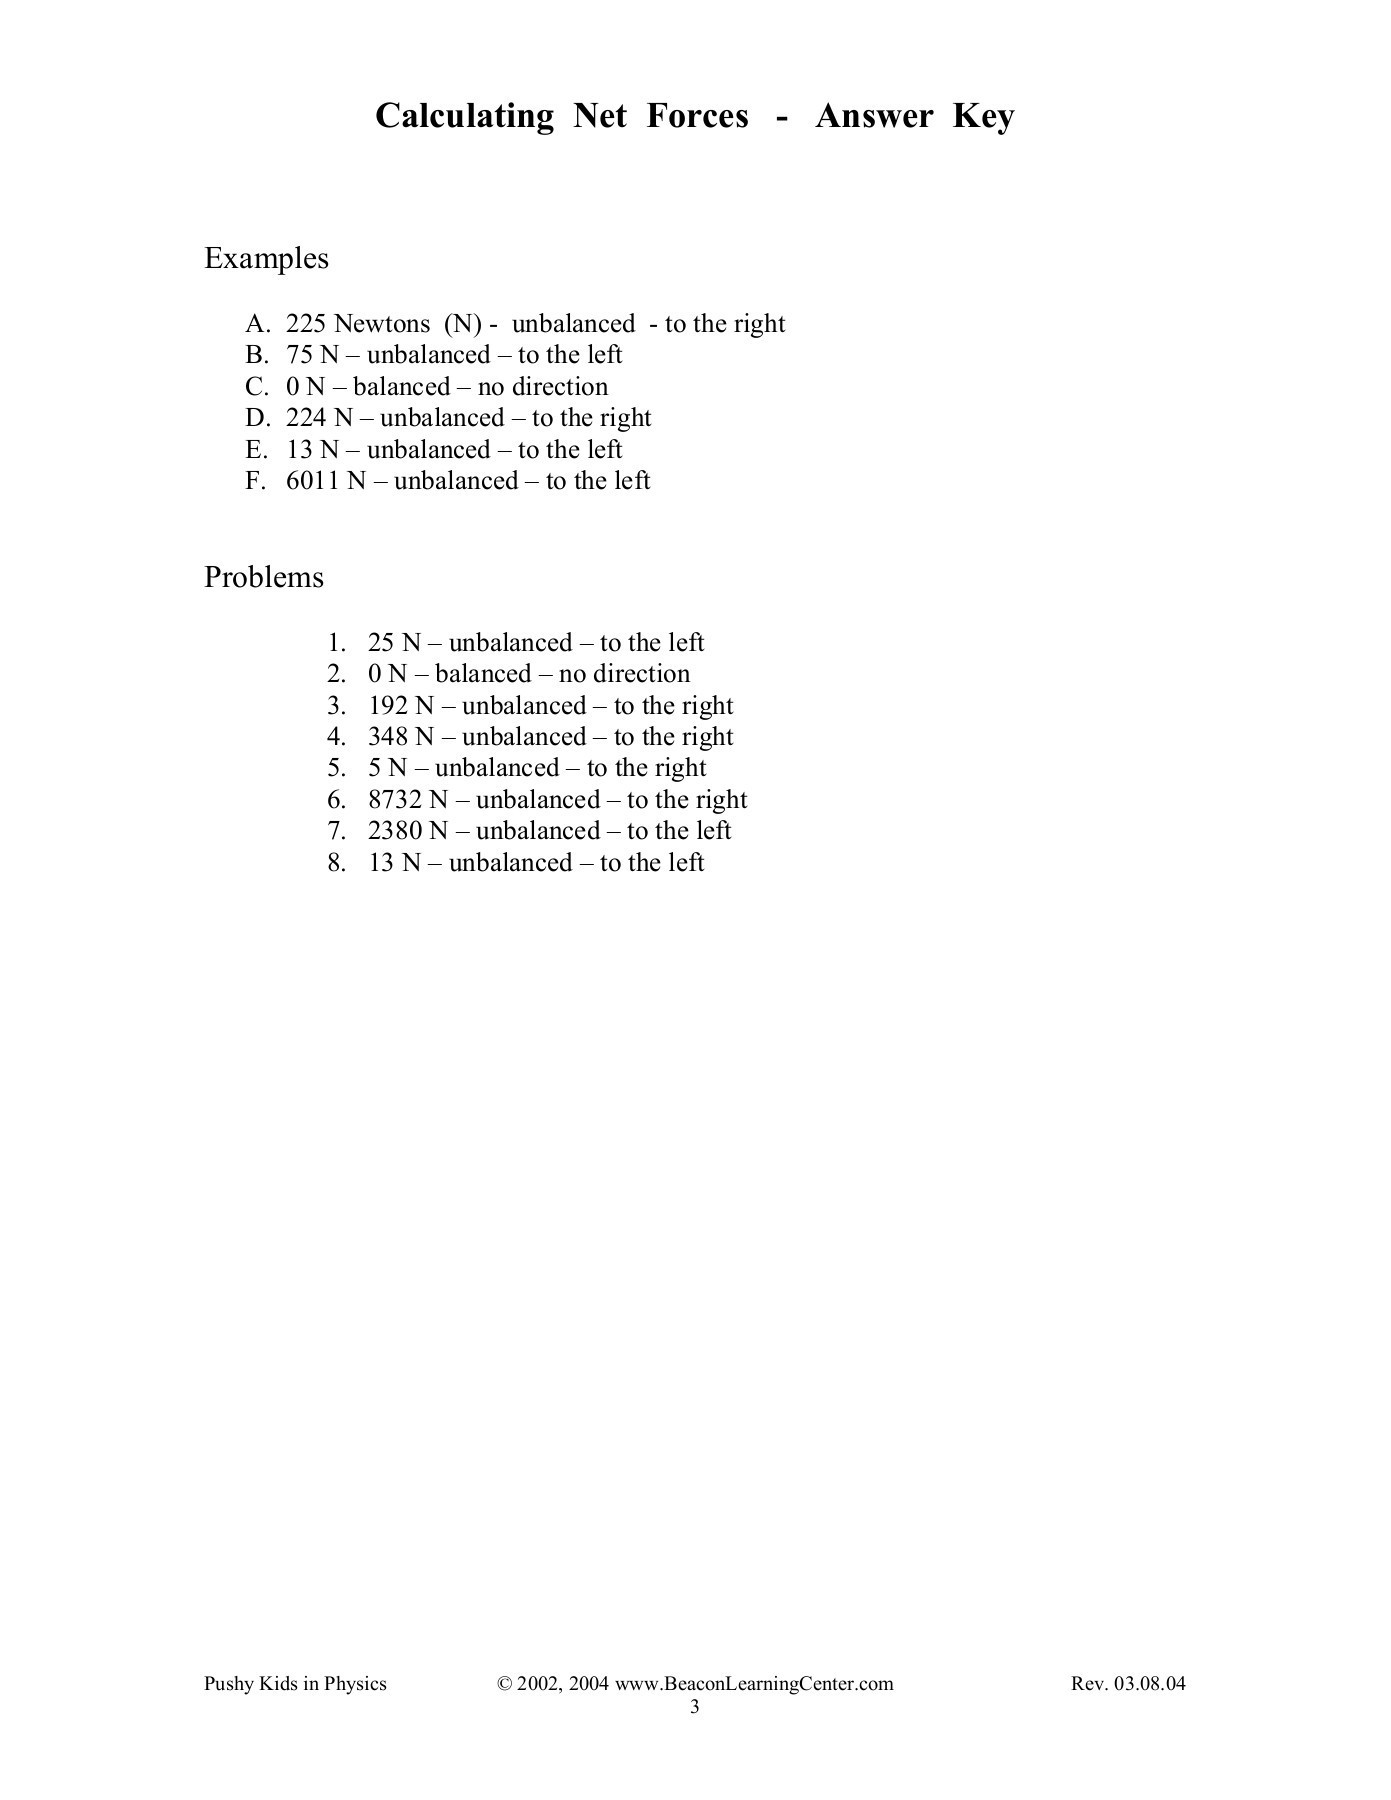 Net force Worksheet Answers Calculating Net forces Examples Pages 1 3 Text Version